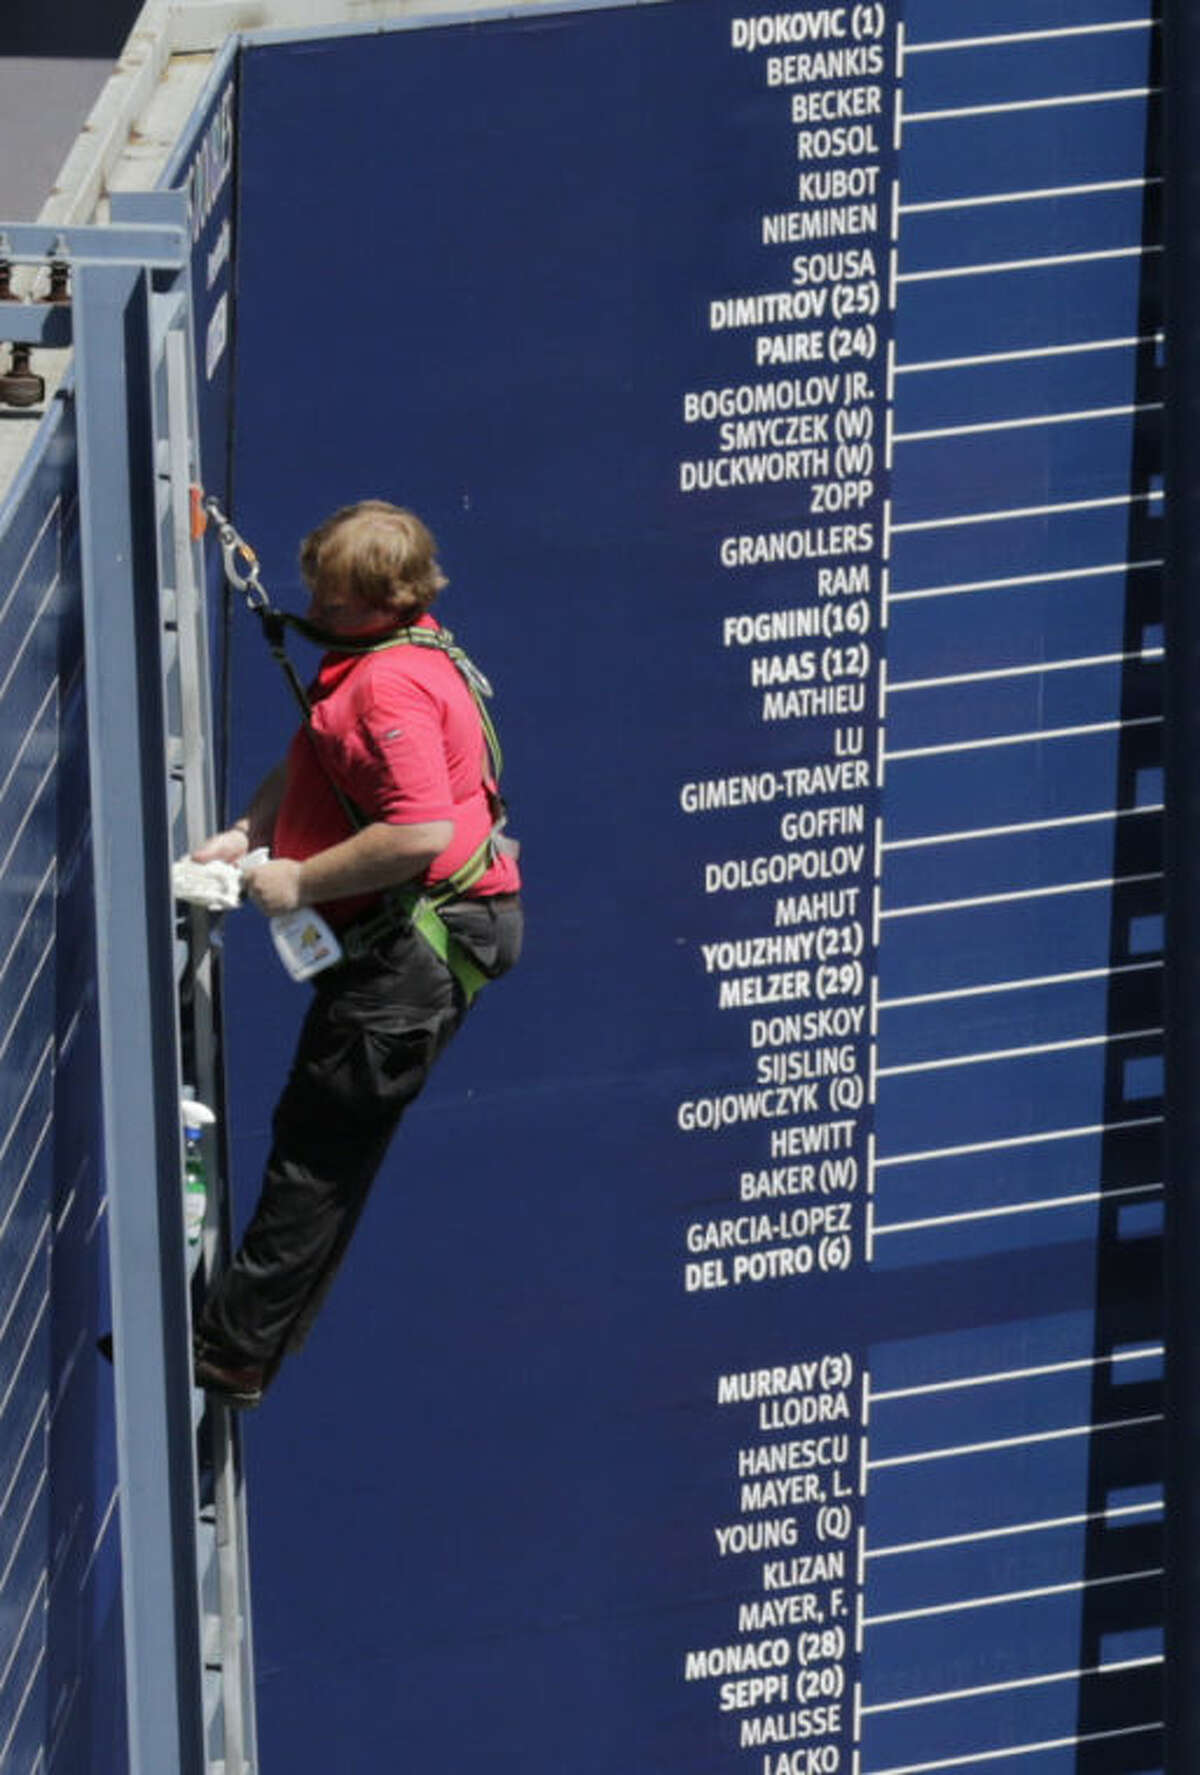 A worker prepares a scoreboard the day before the start of the 2013 US Open tennis tournament Sunday, Aug. 25, 2013, in New York. (AP Photo/Charles Krupa)